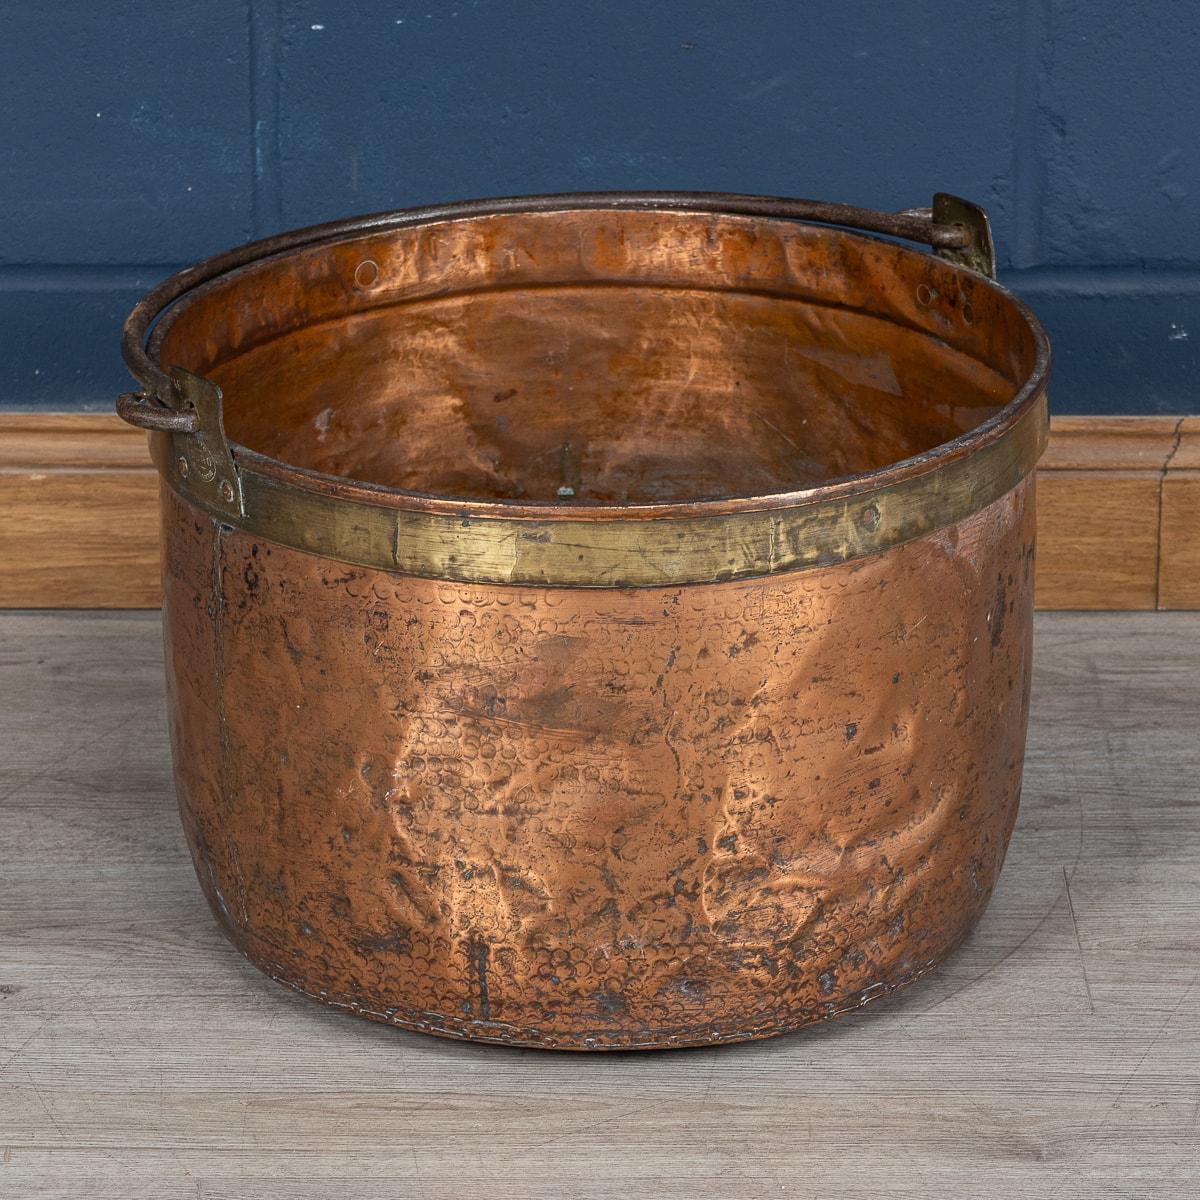 Created around 1860, this substantial copper cooking pot reflects the meticulous attention to detail and skilled artistry characteristic of the era. Its generous size and decorative design make it a striking addition to any kitchen, echoing the